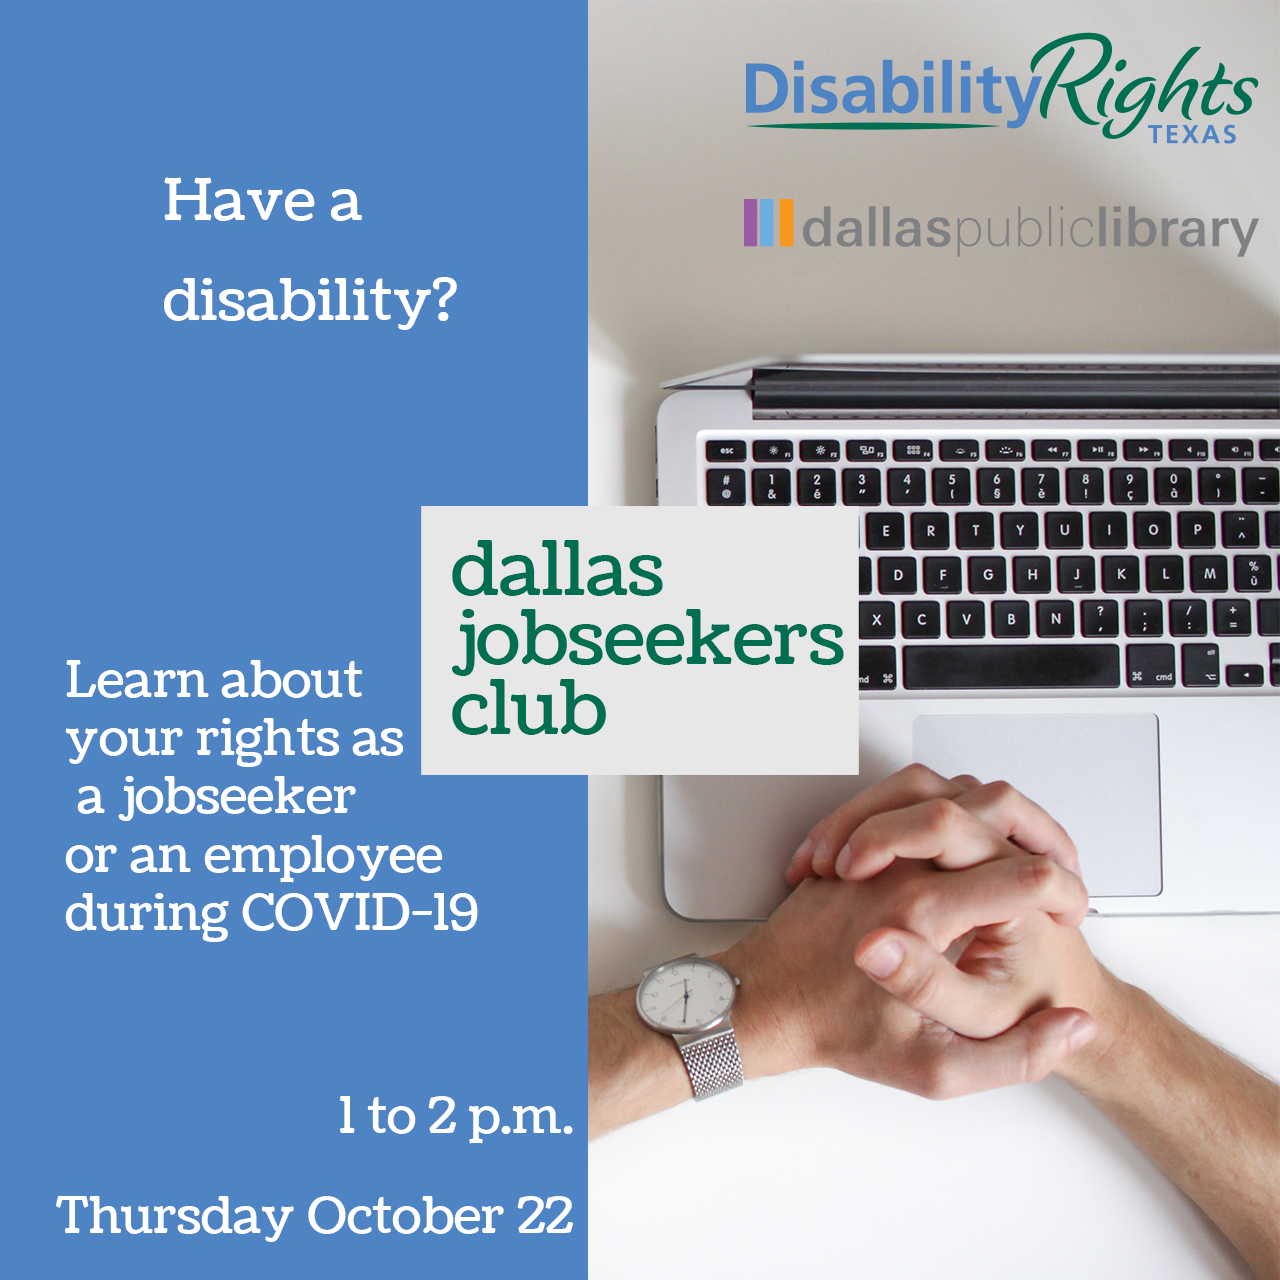 Dallas Jobseekers Club with Disability Rights Texas